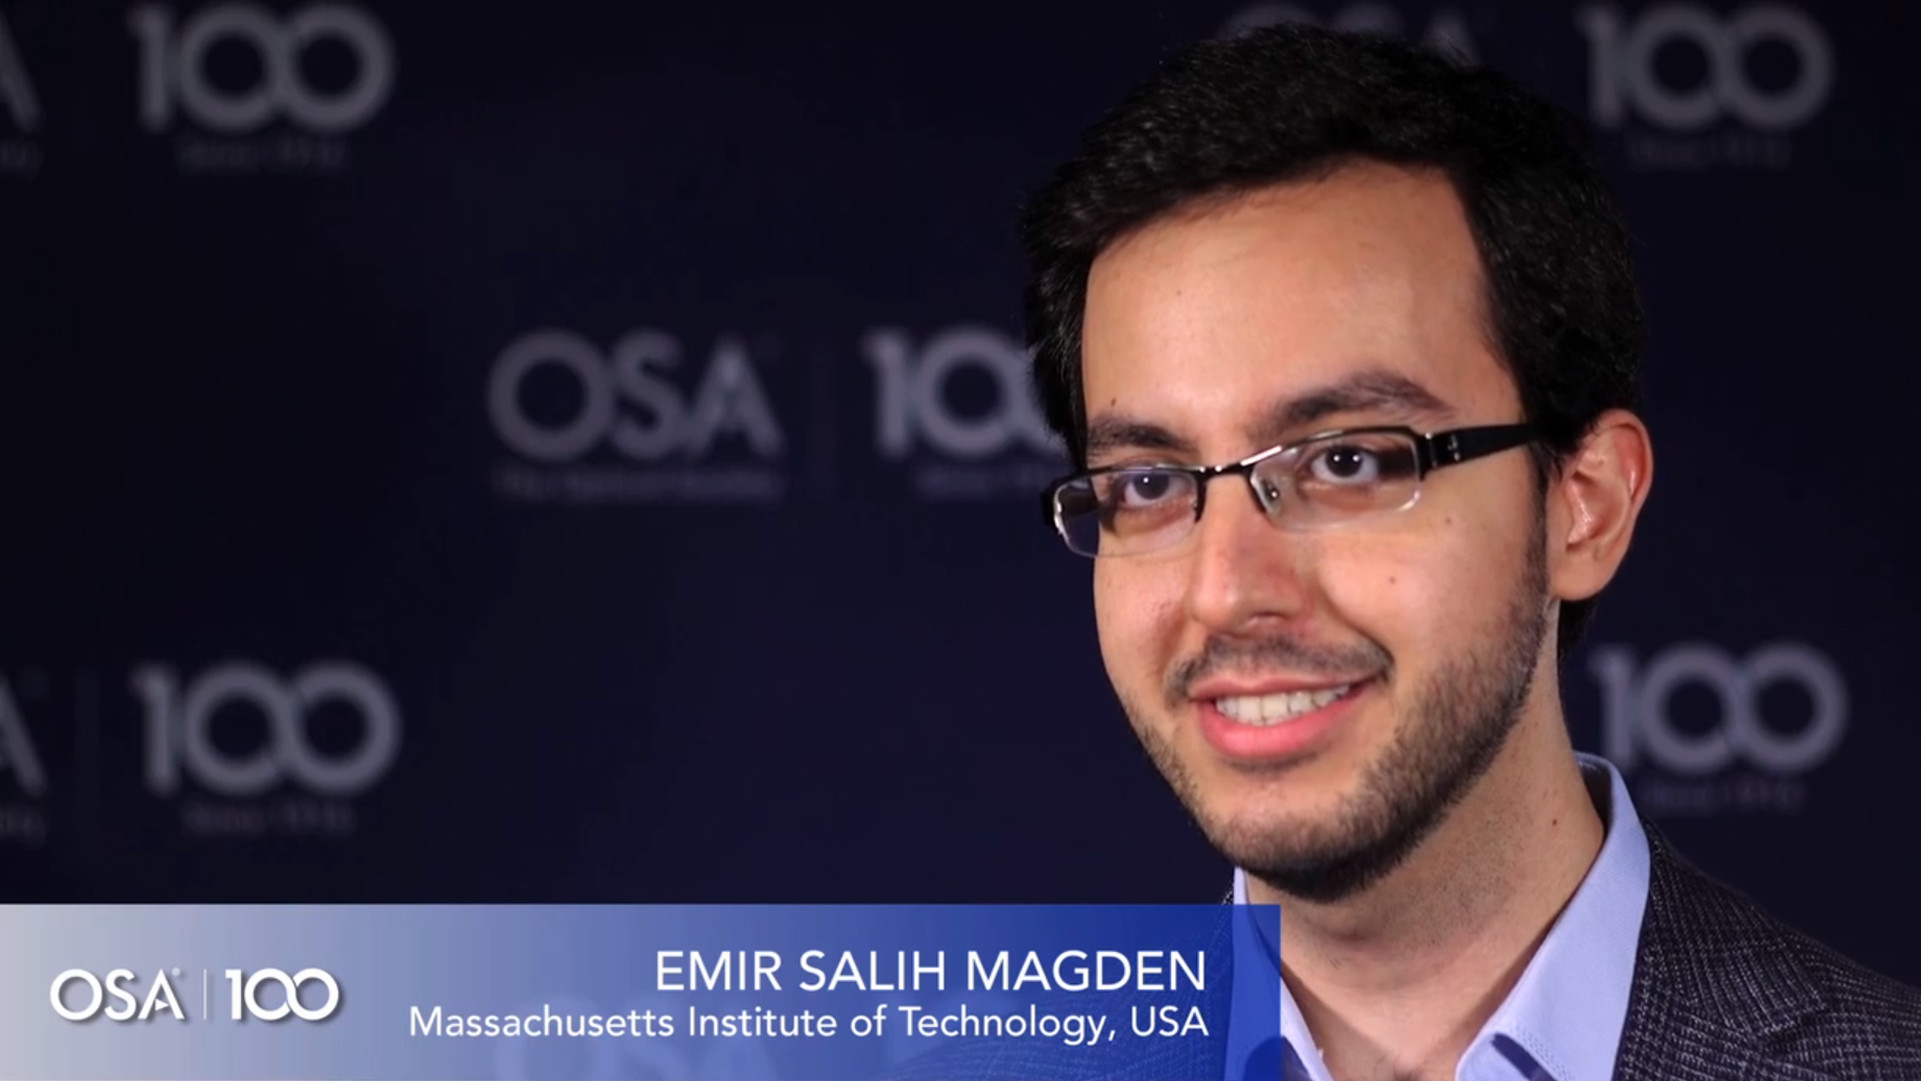 OSA interviews Prof. Mağden on why he finds working with light so inspiring.